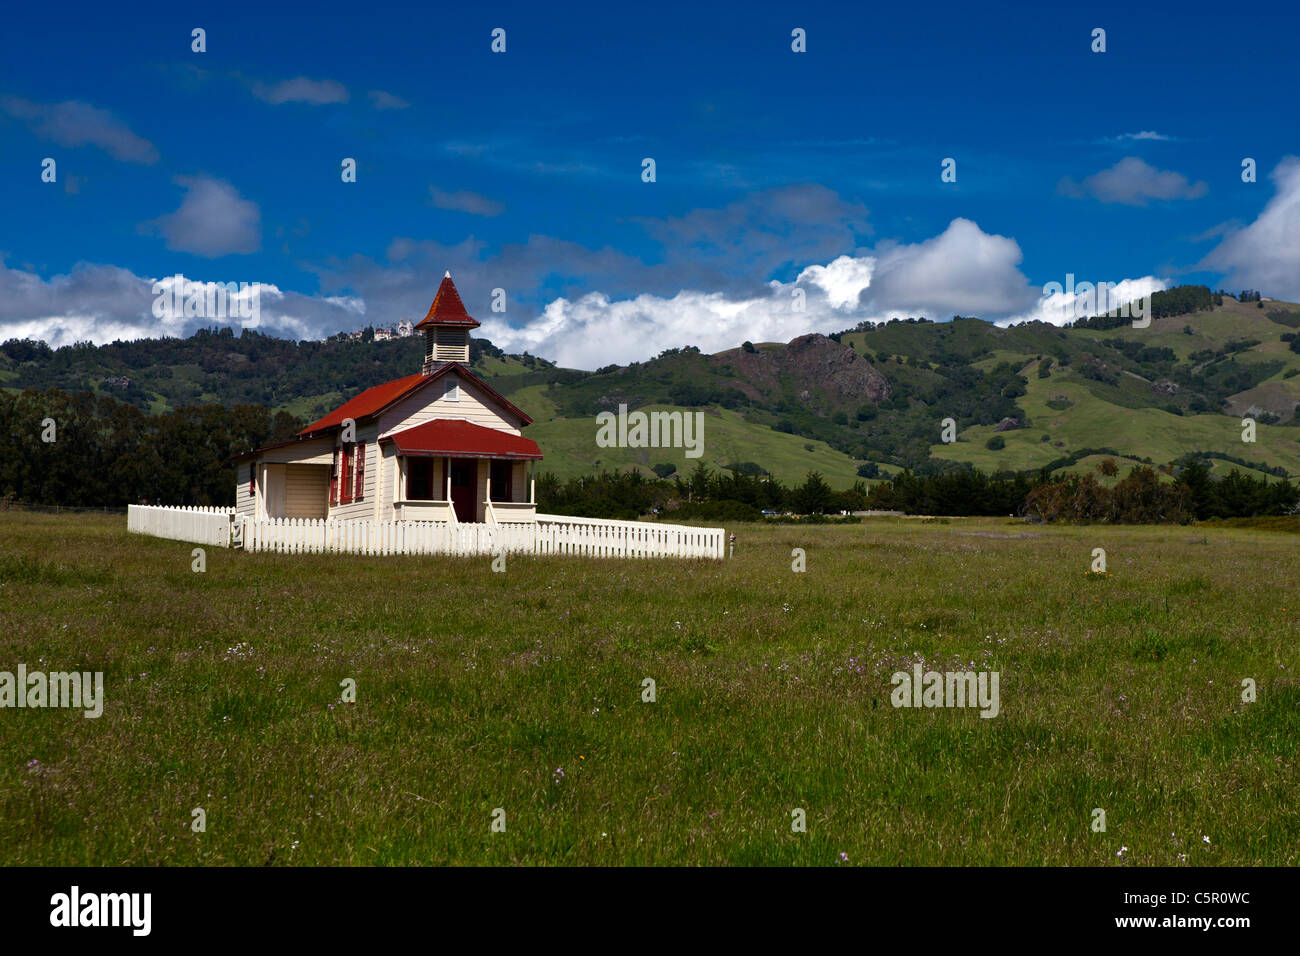 One room school house with Hearst Castle in the background, San Simeon, California, United States of America Stock Photo